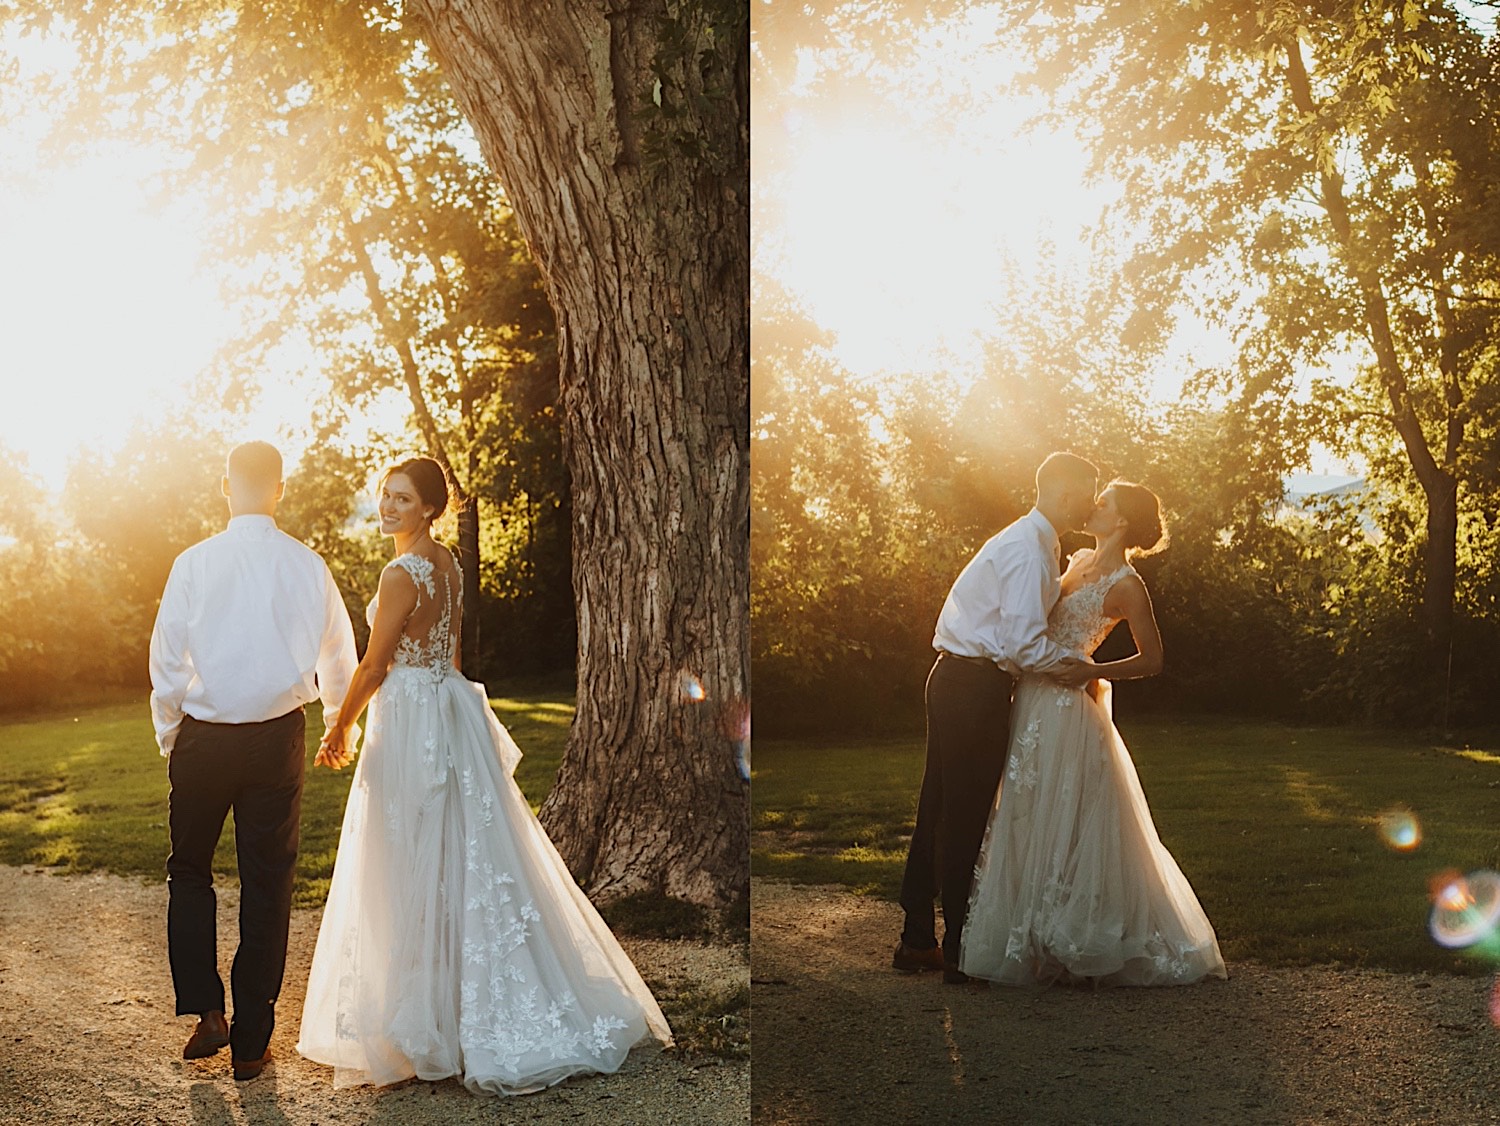 2 photos side by side of a bride and groom standing with their backs to the camera at sunset, in the left photo the bride is looking over her shoulder at the camera